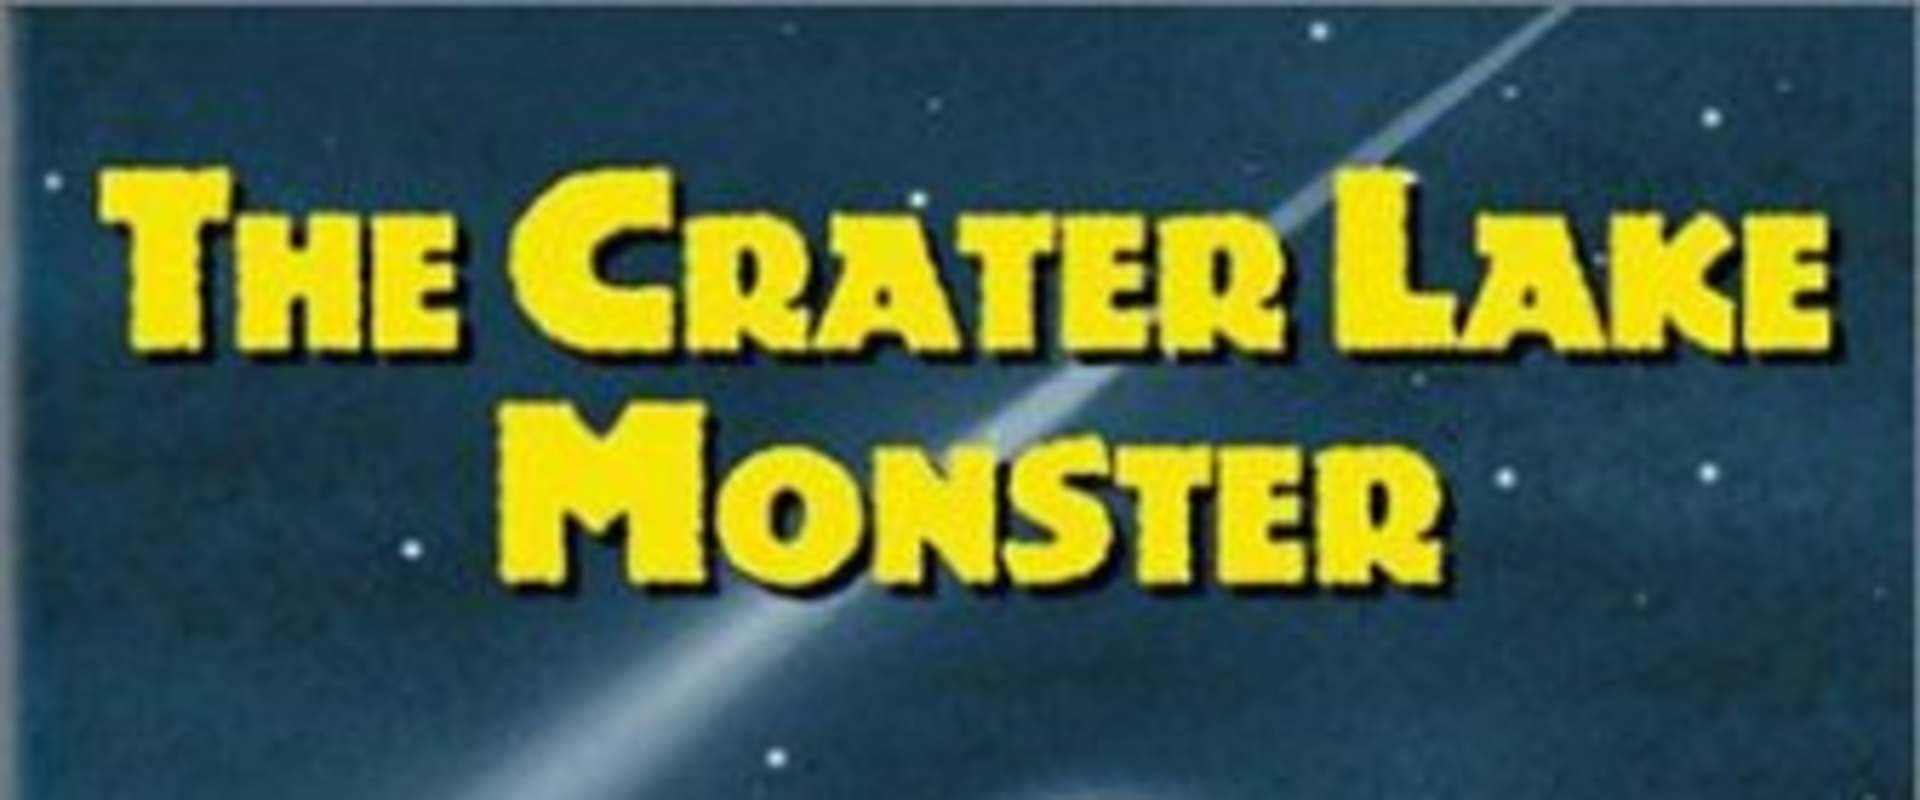 The Crater Lake Monster background 2